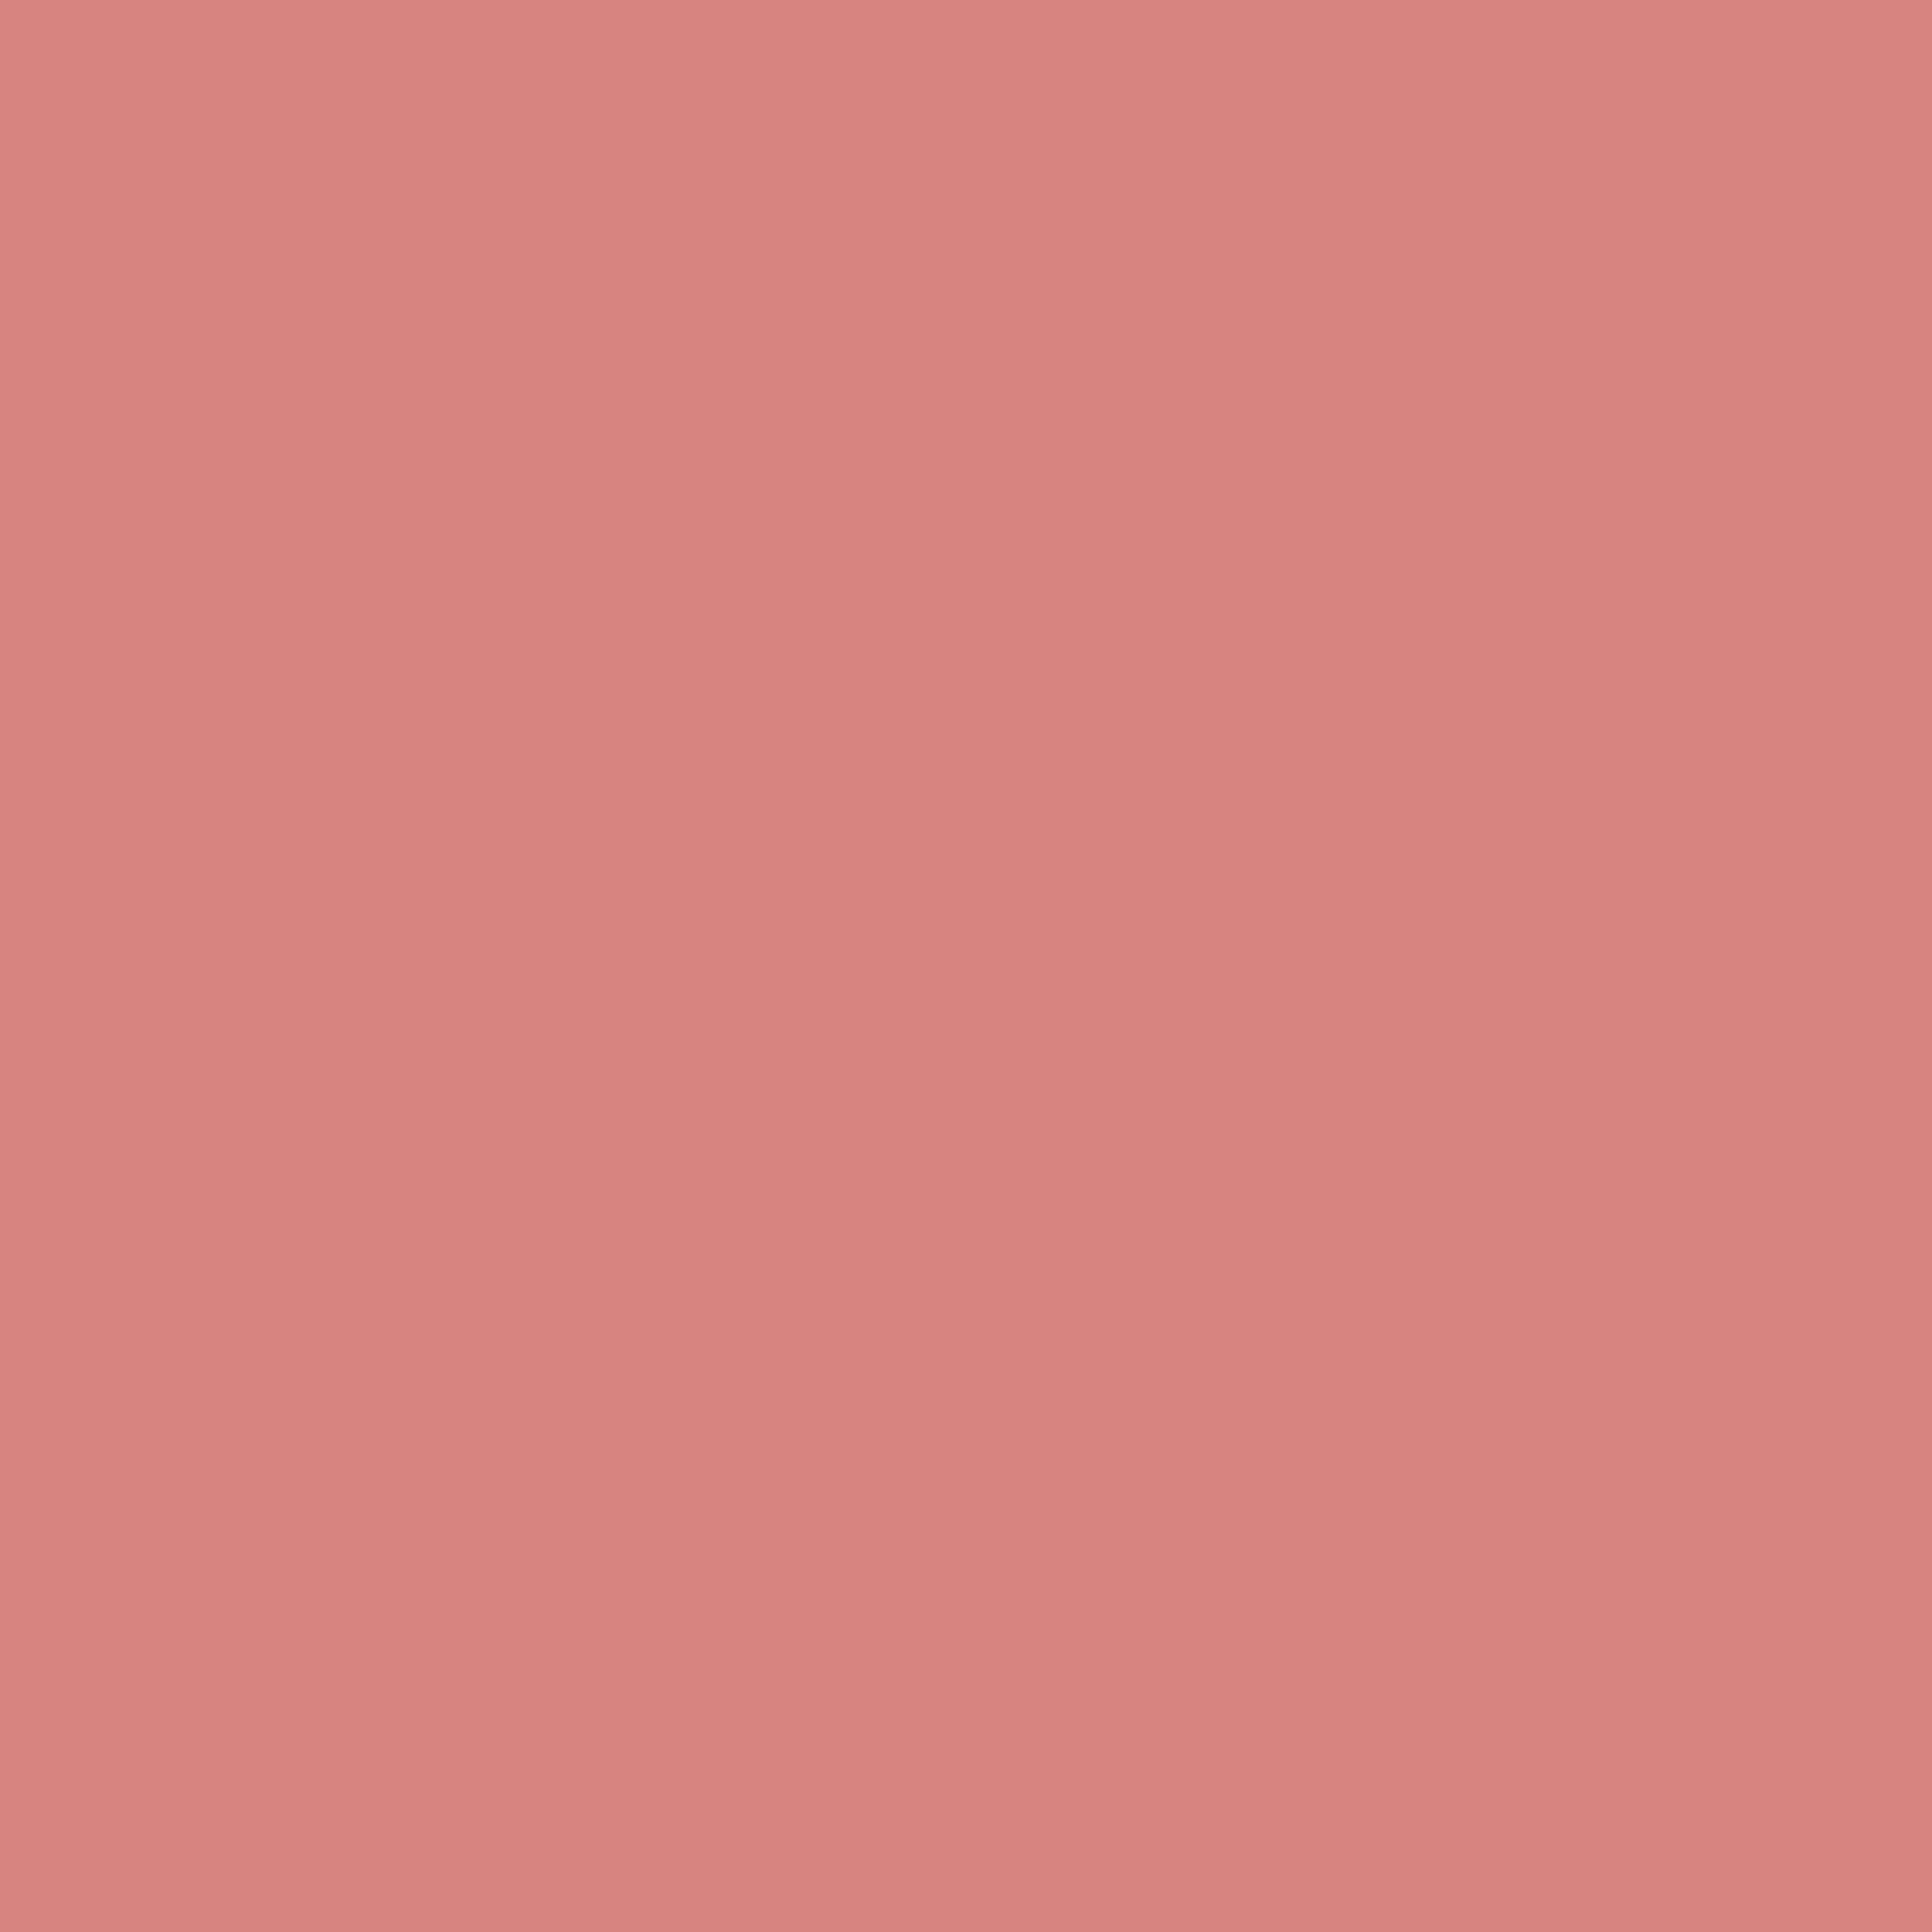 3600x3600 New York Pink Solid Color Background